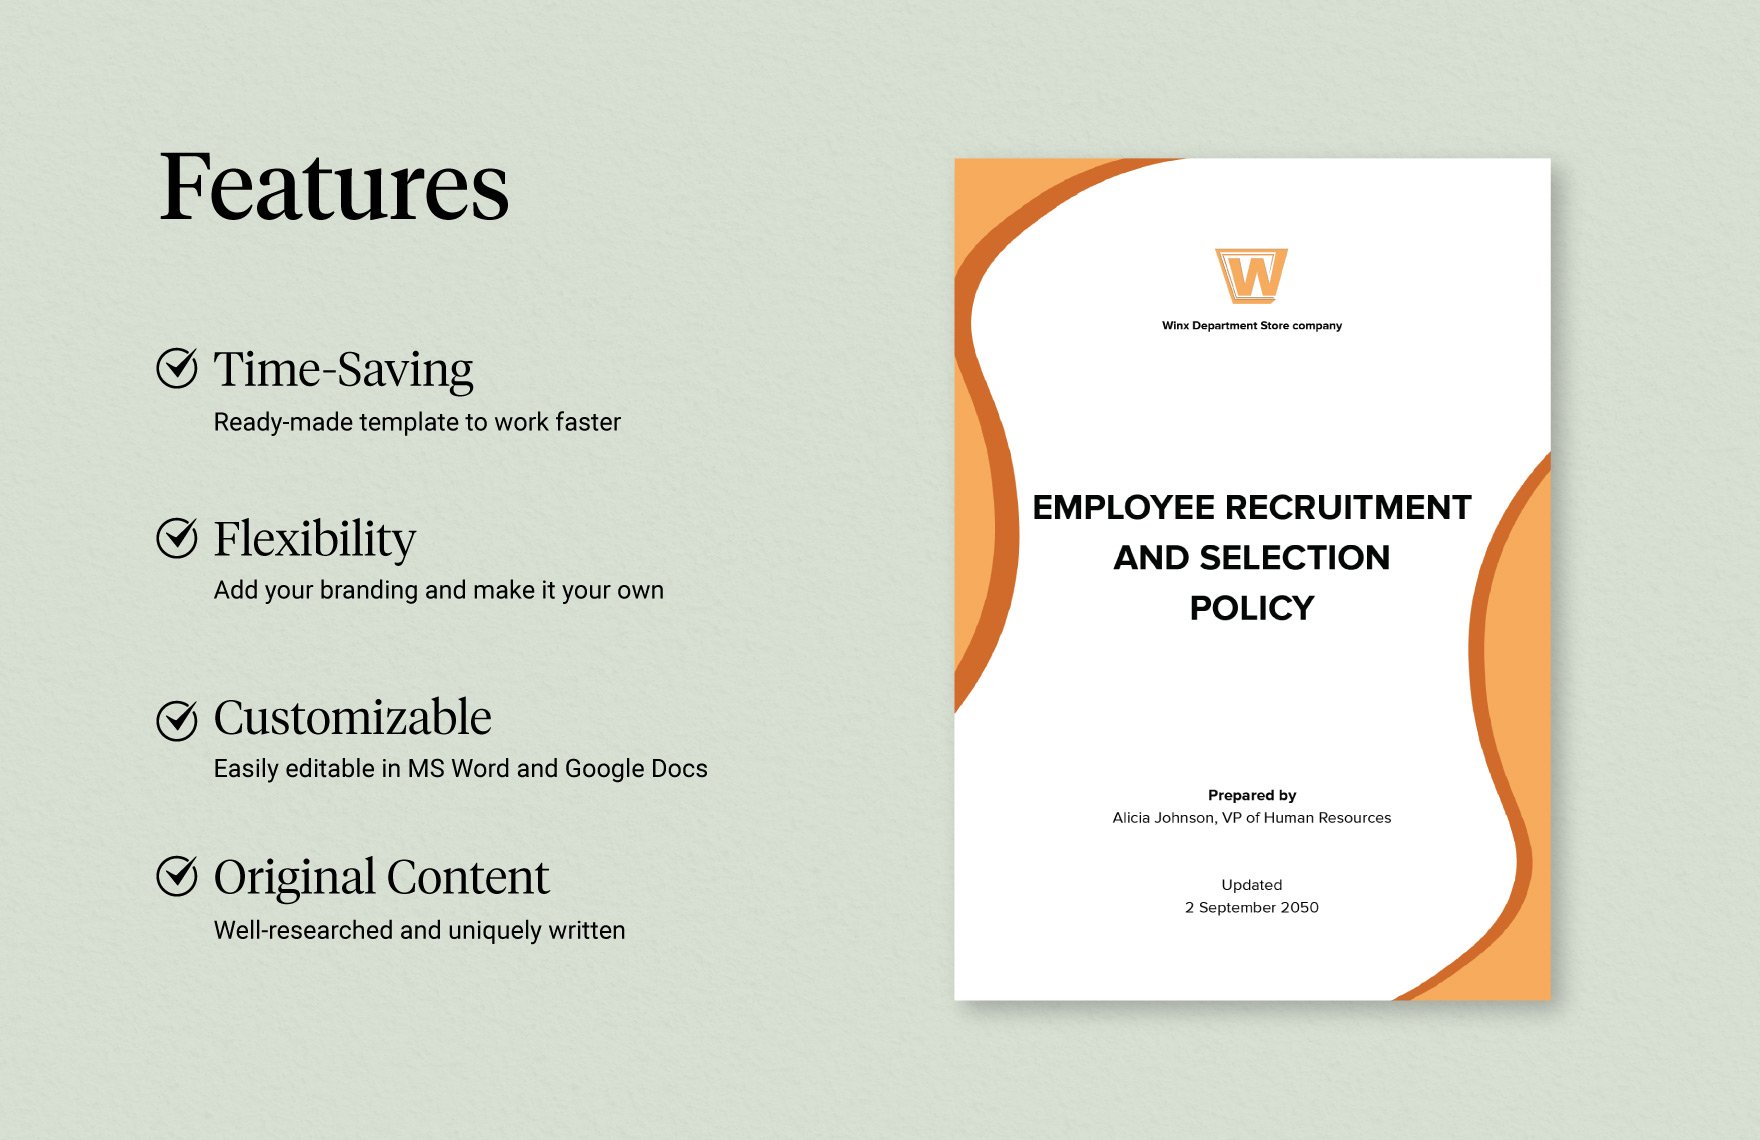 Employee Recruitment and Selection Policy Template